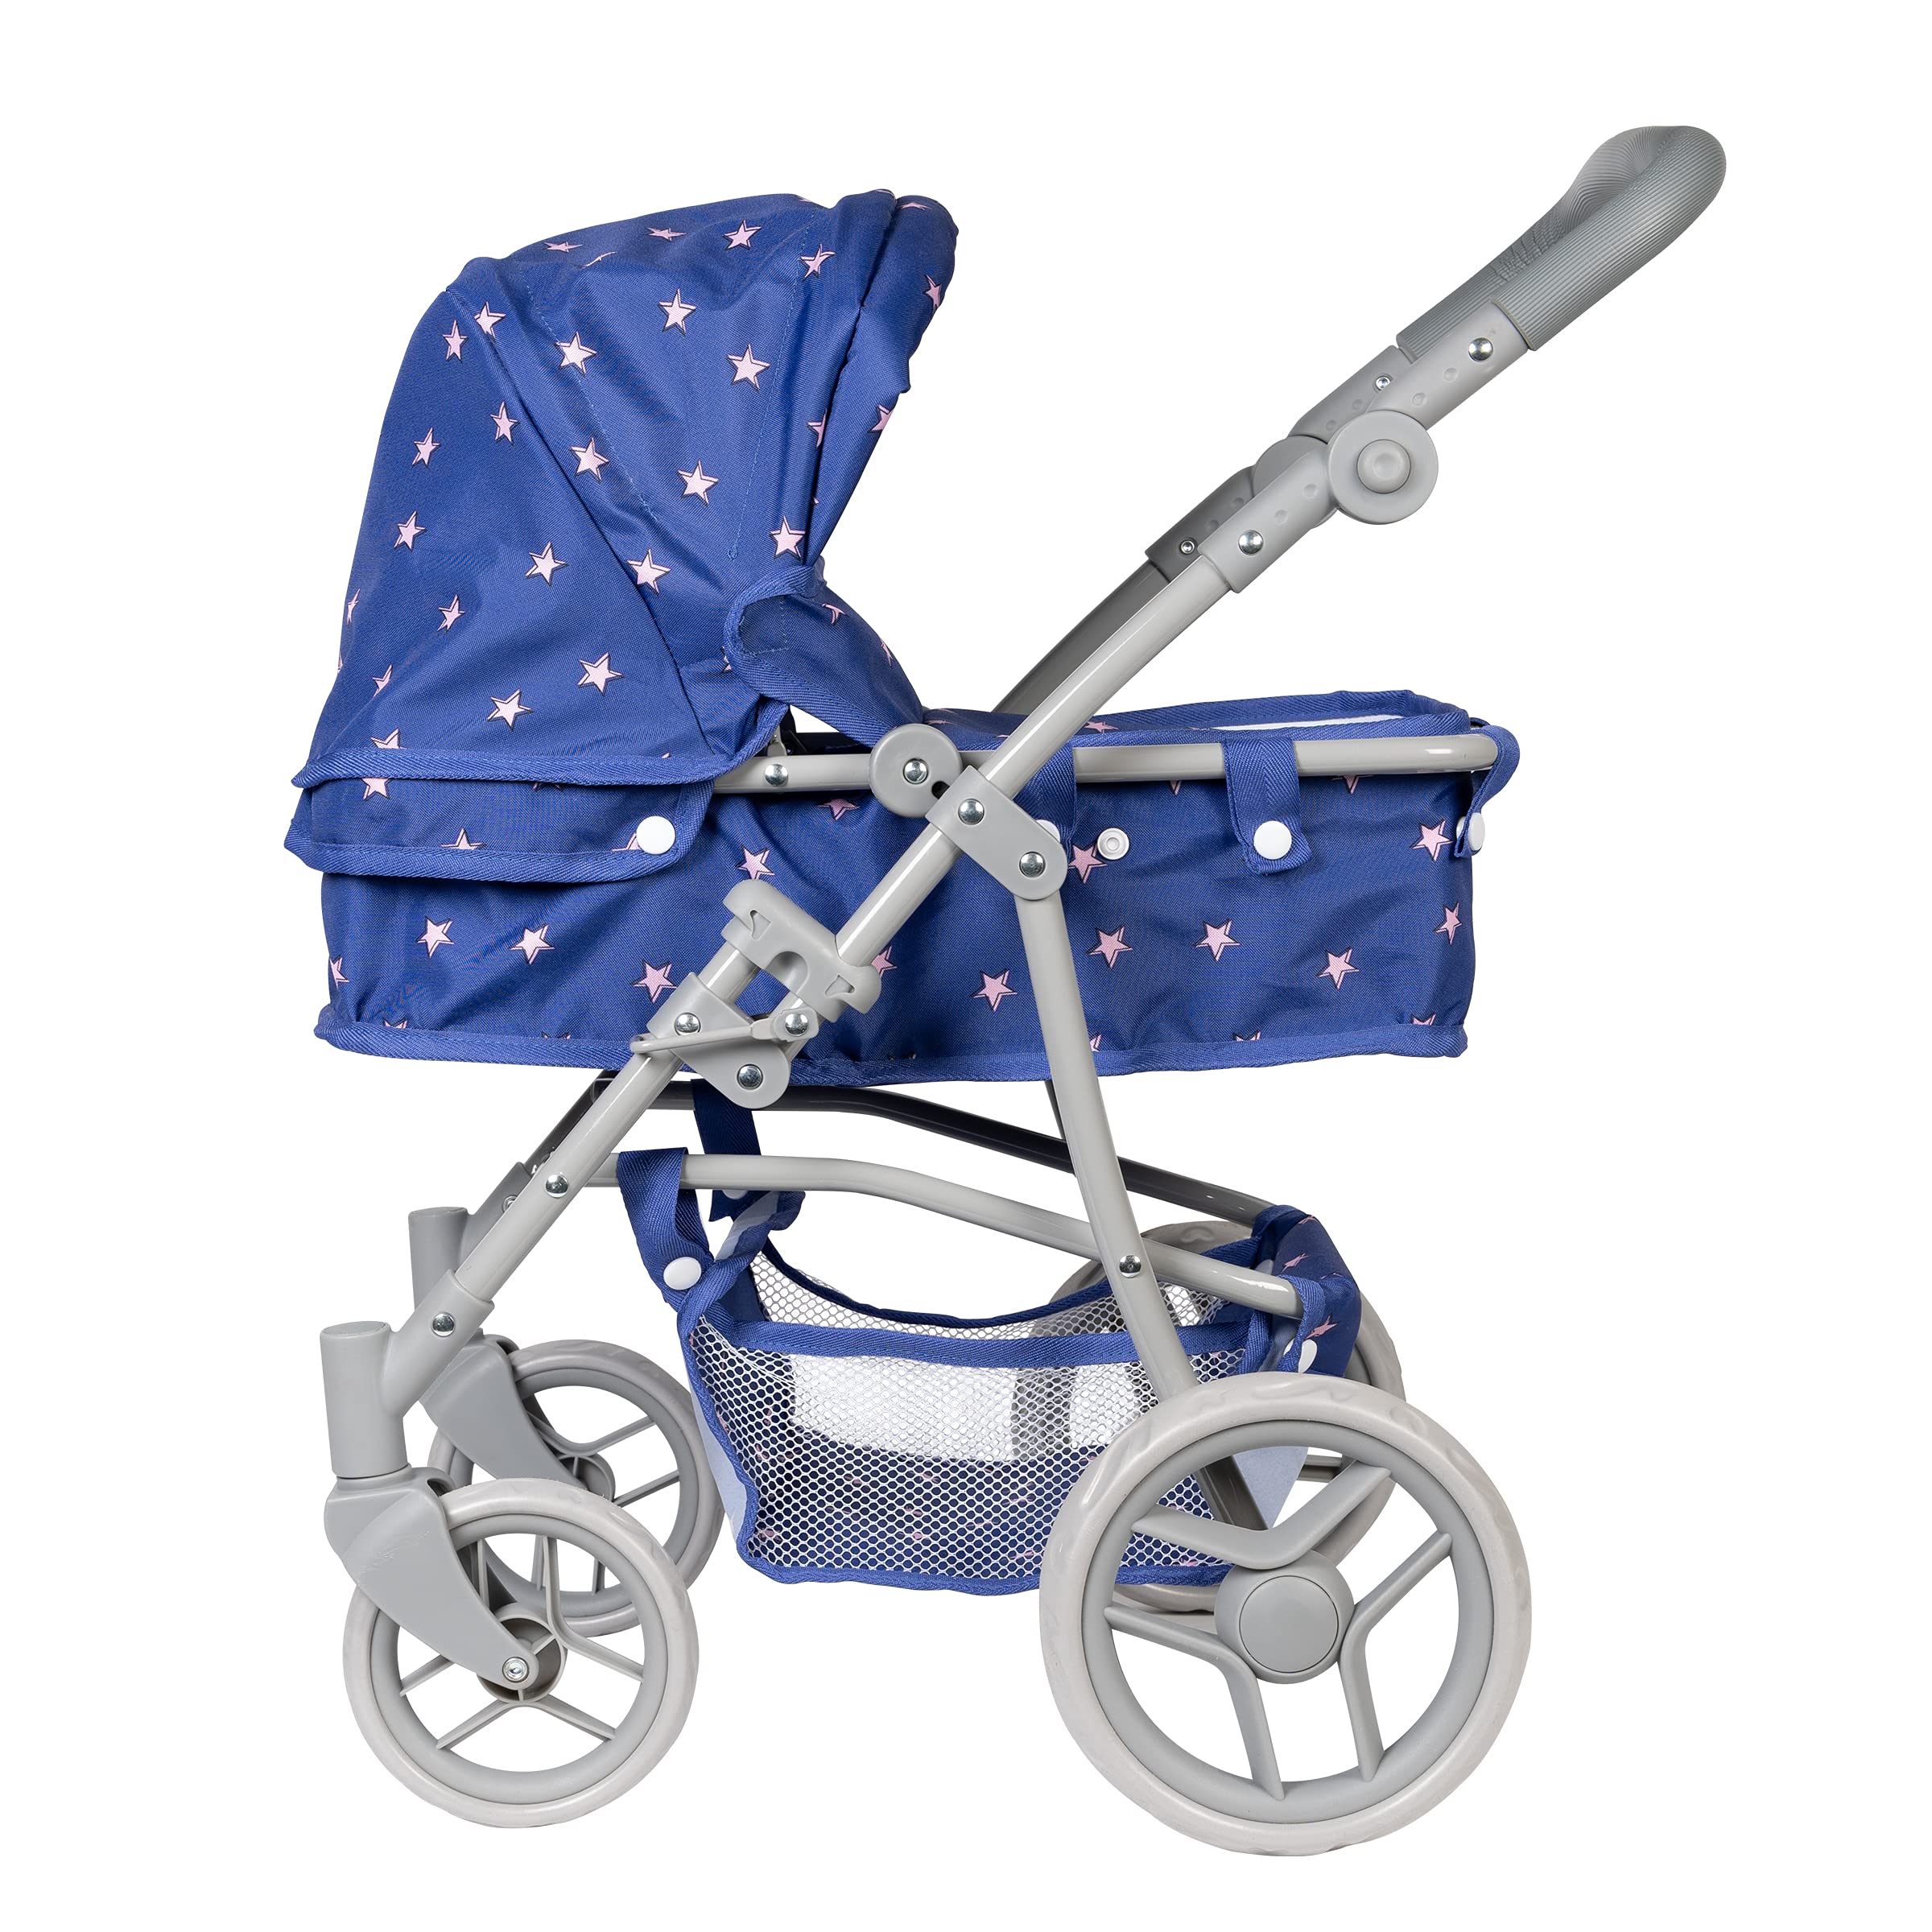 ADORA Baby Doll Stroller, 2-in-1 Convertible Starry Night Stroller, Fits Dolls Up to 20 Inches